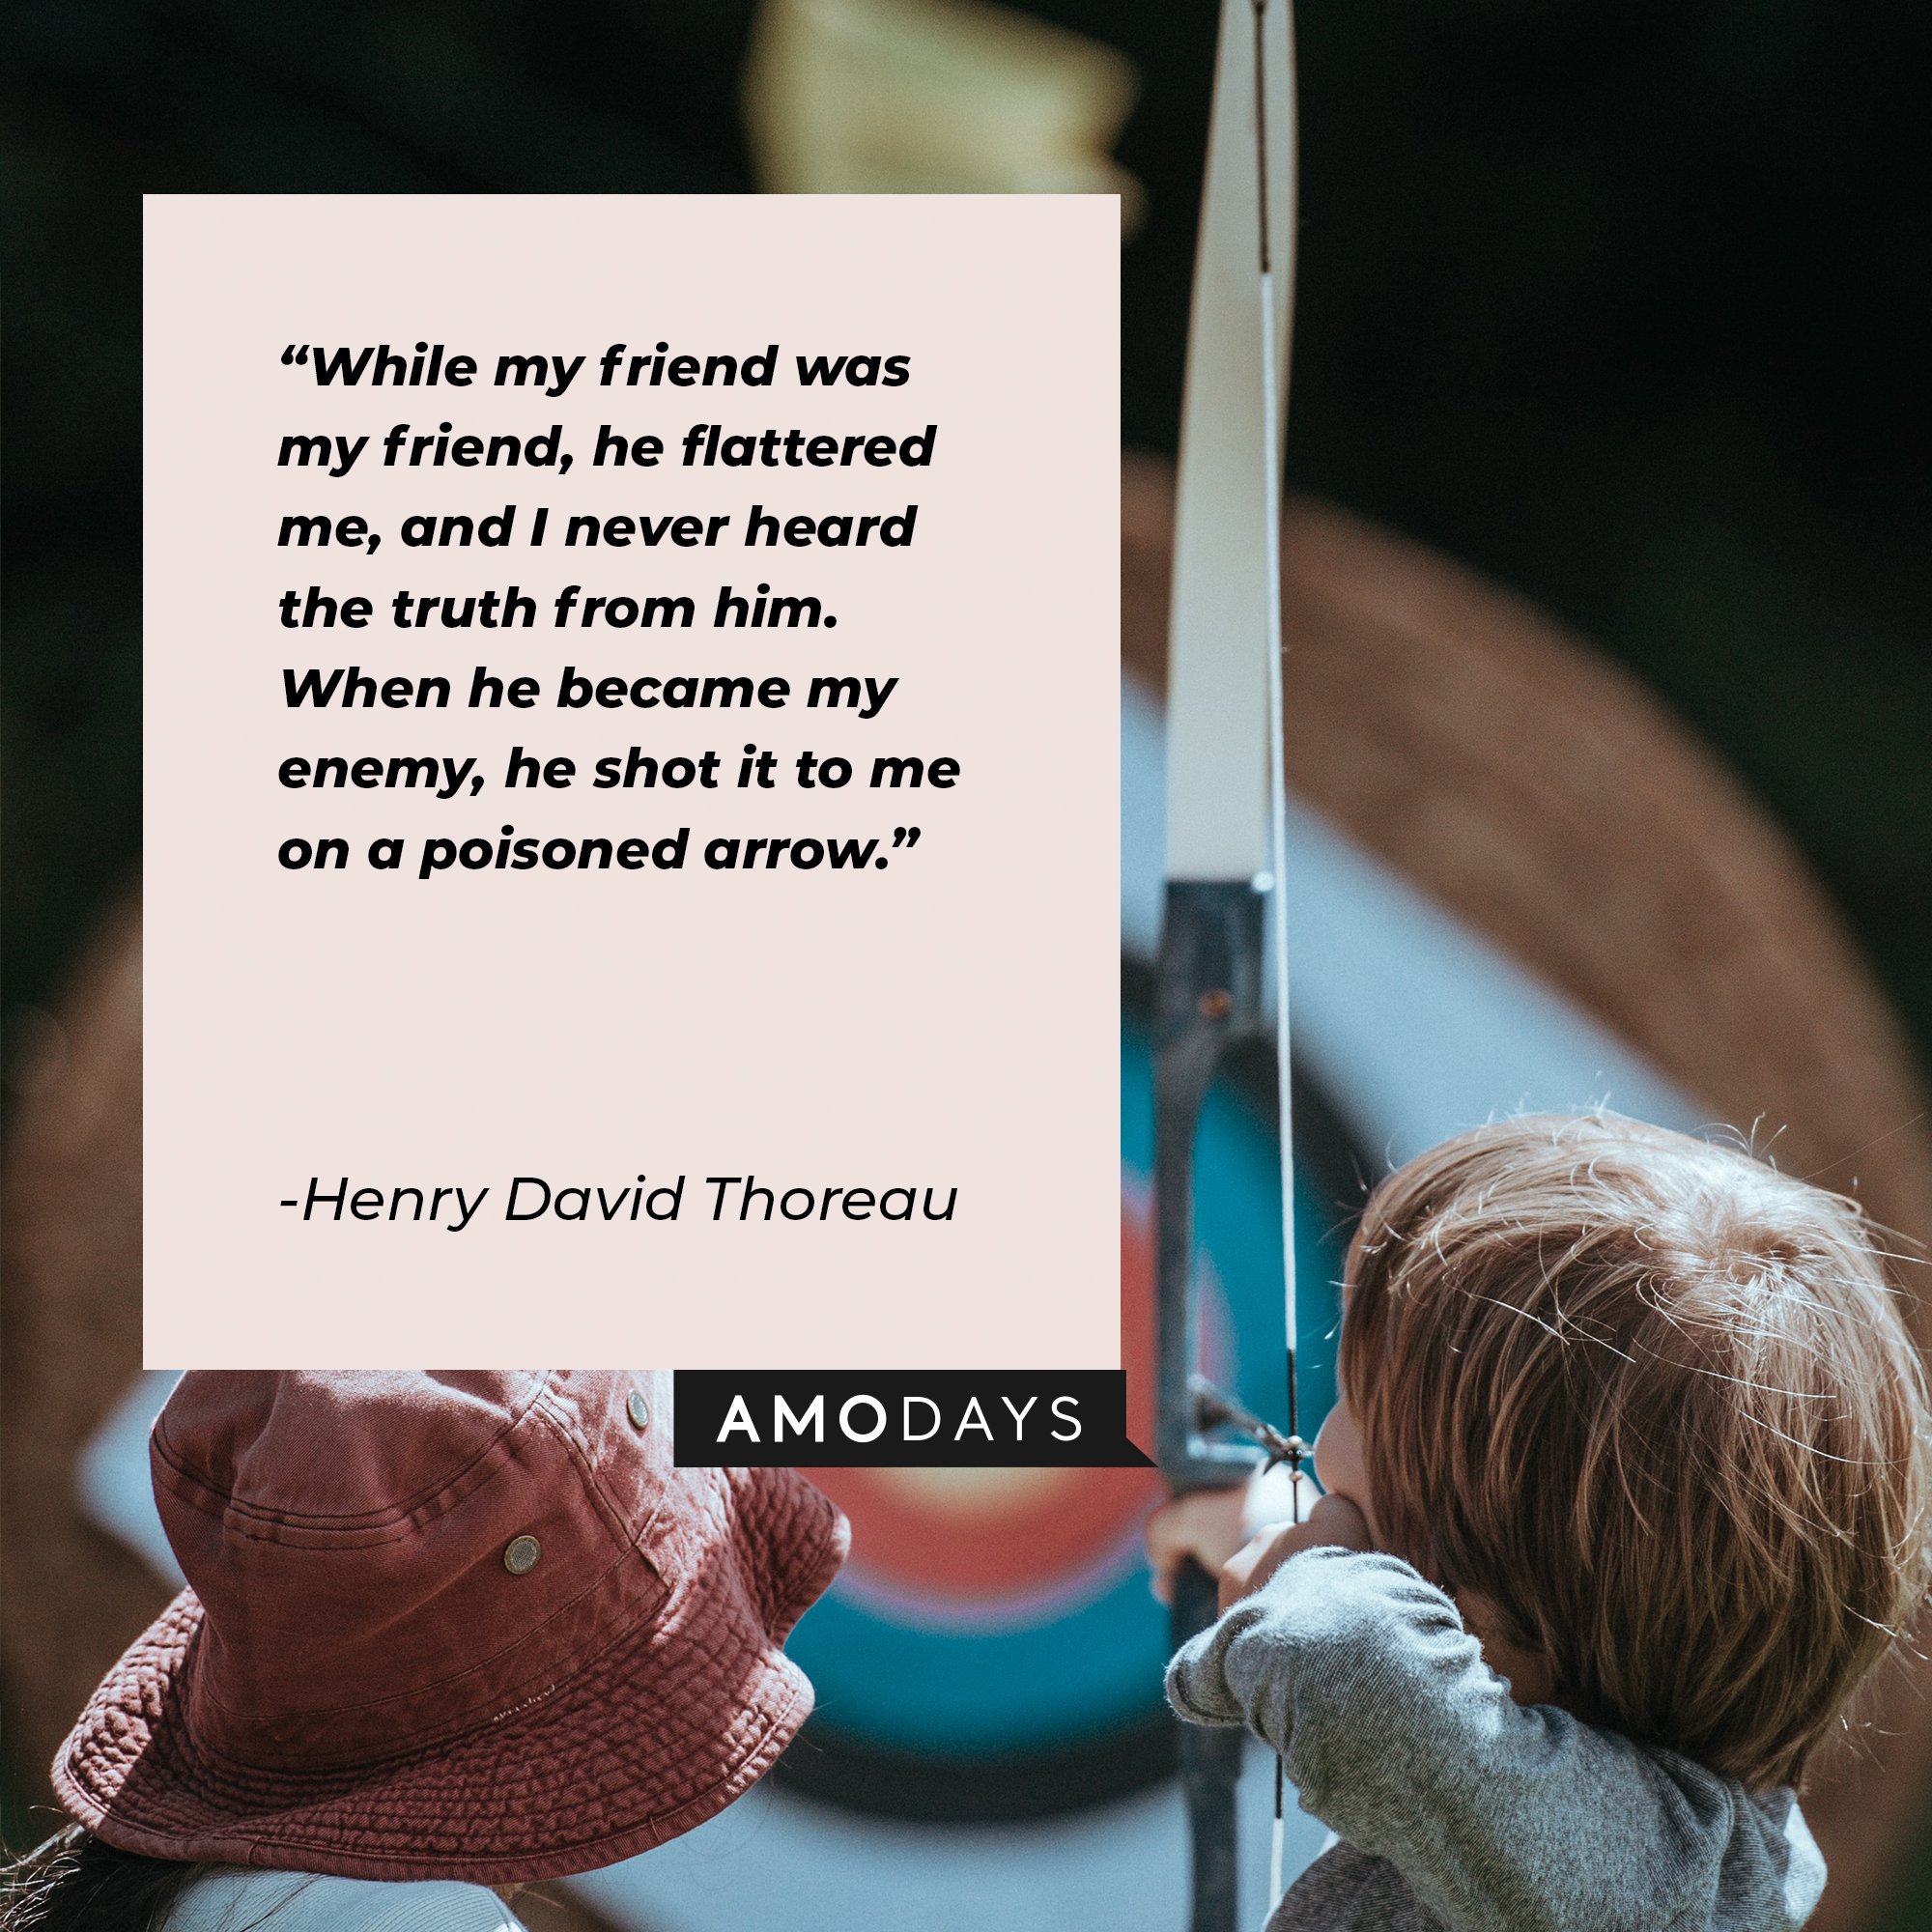 Henry David Thoreau’s quote: "While my friend was my friend, he flattered me, and I never heard the truth from him. When he became my enemy, he shot it to me on a poisoned arrow."  | Image: AmoDays